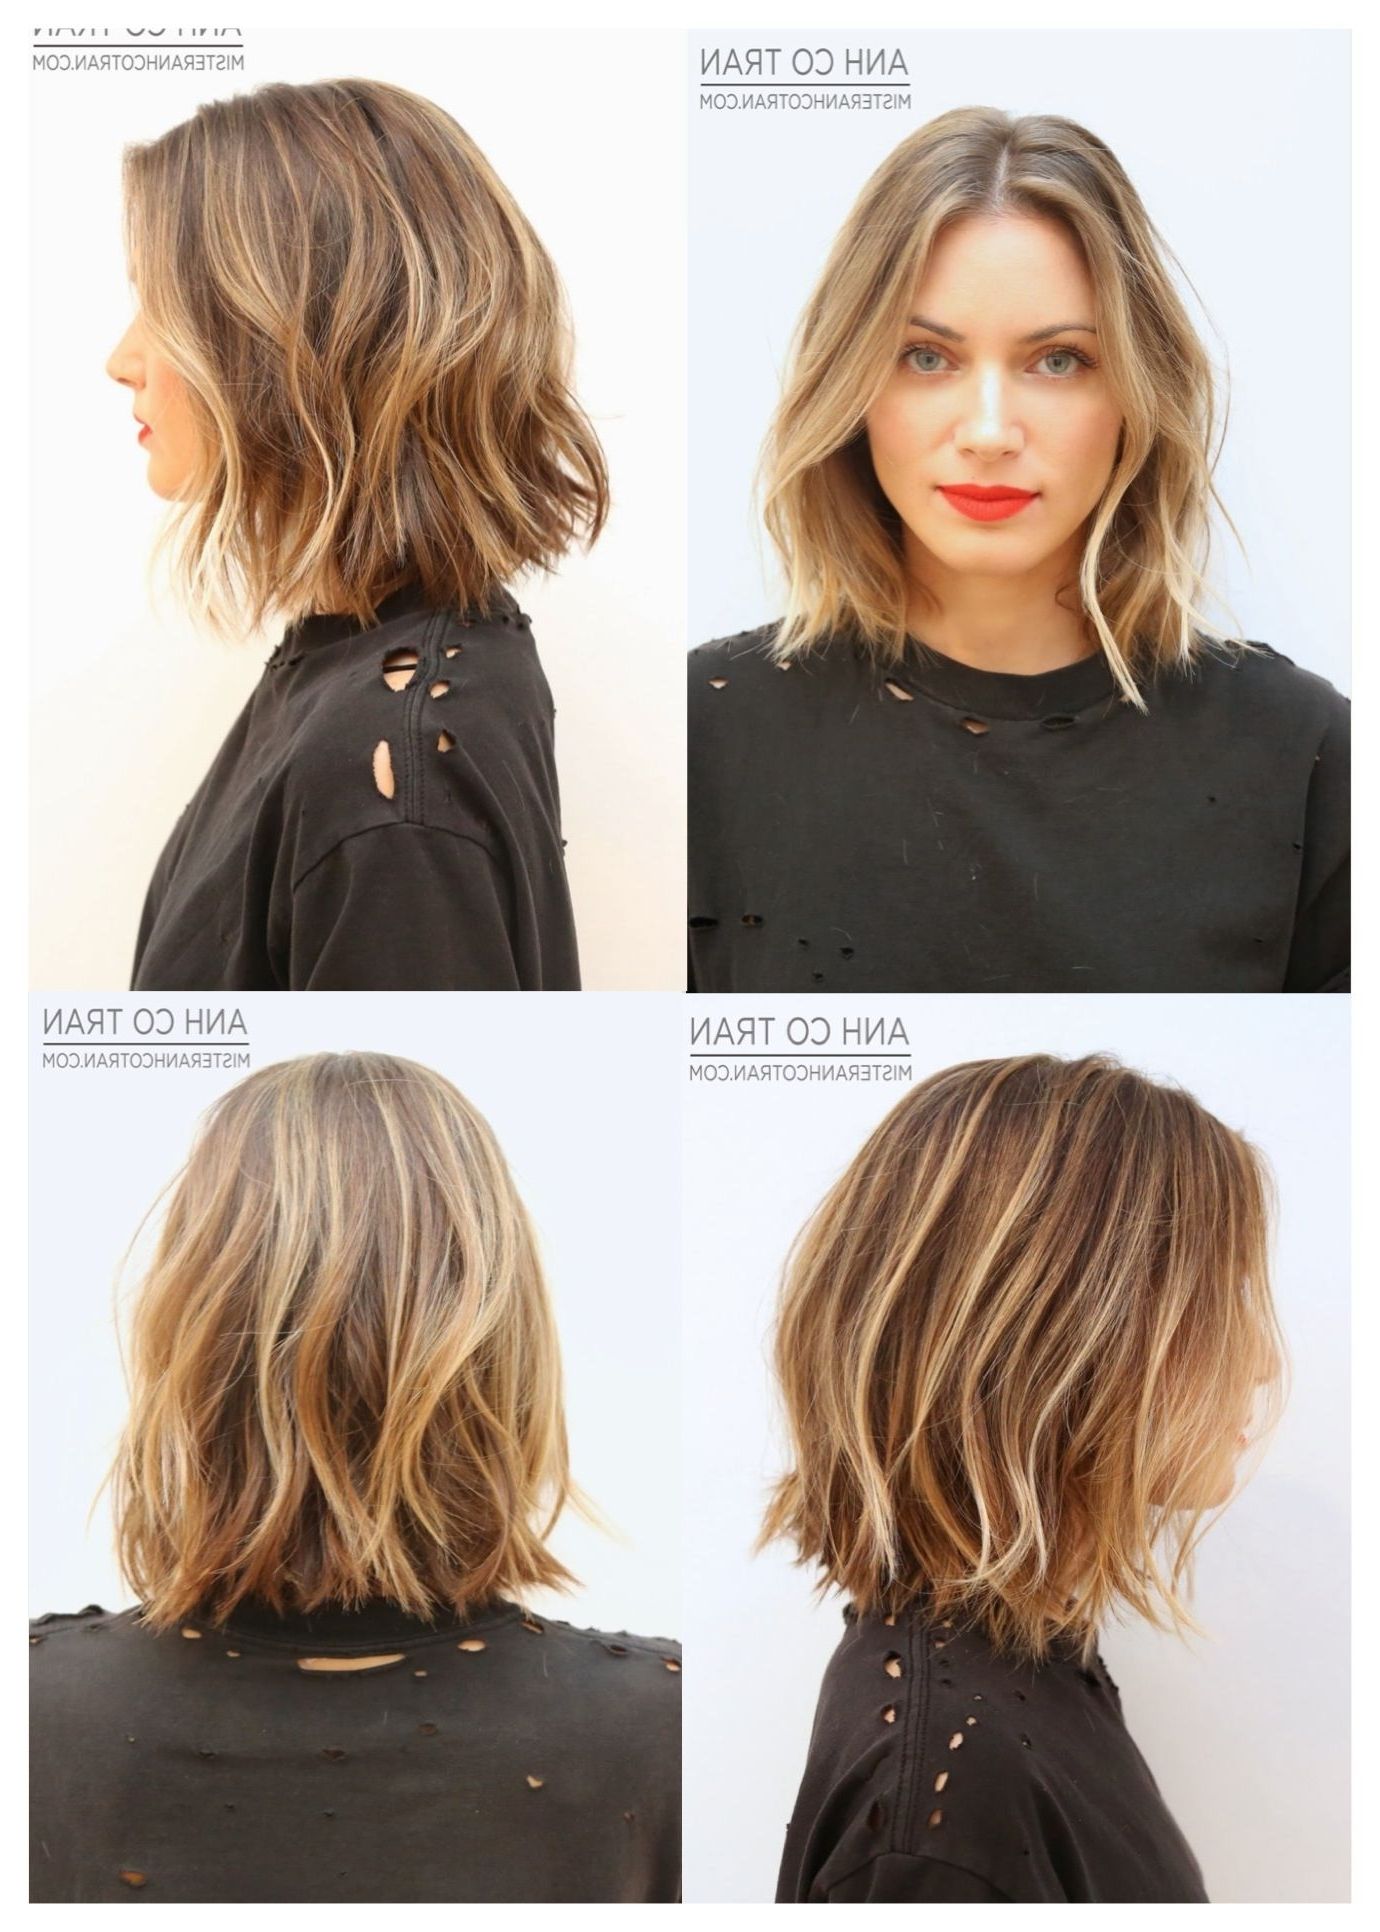 Popular Tousled Shoulder Length Waves Blonde Hairstyles With Regard To Short Tousled Hair (View 6 of 20)